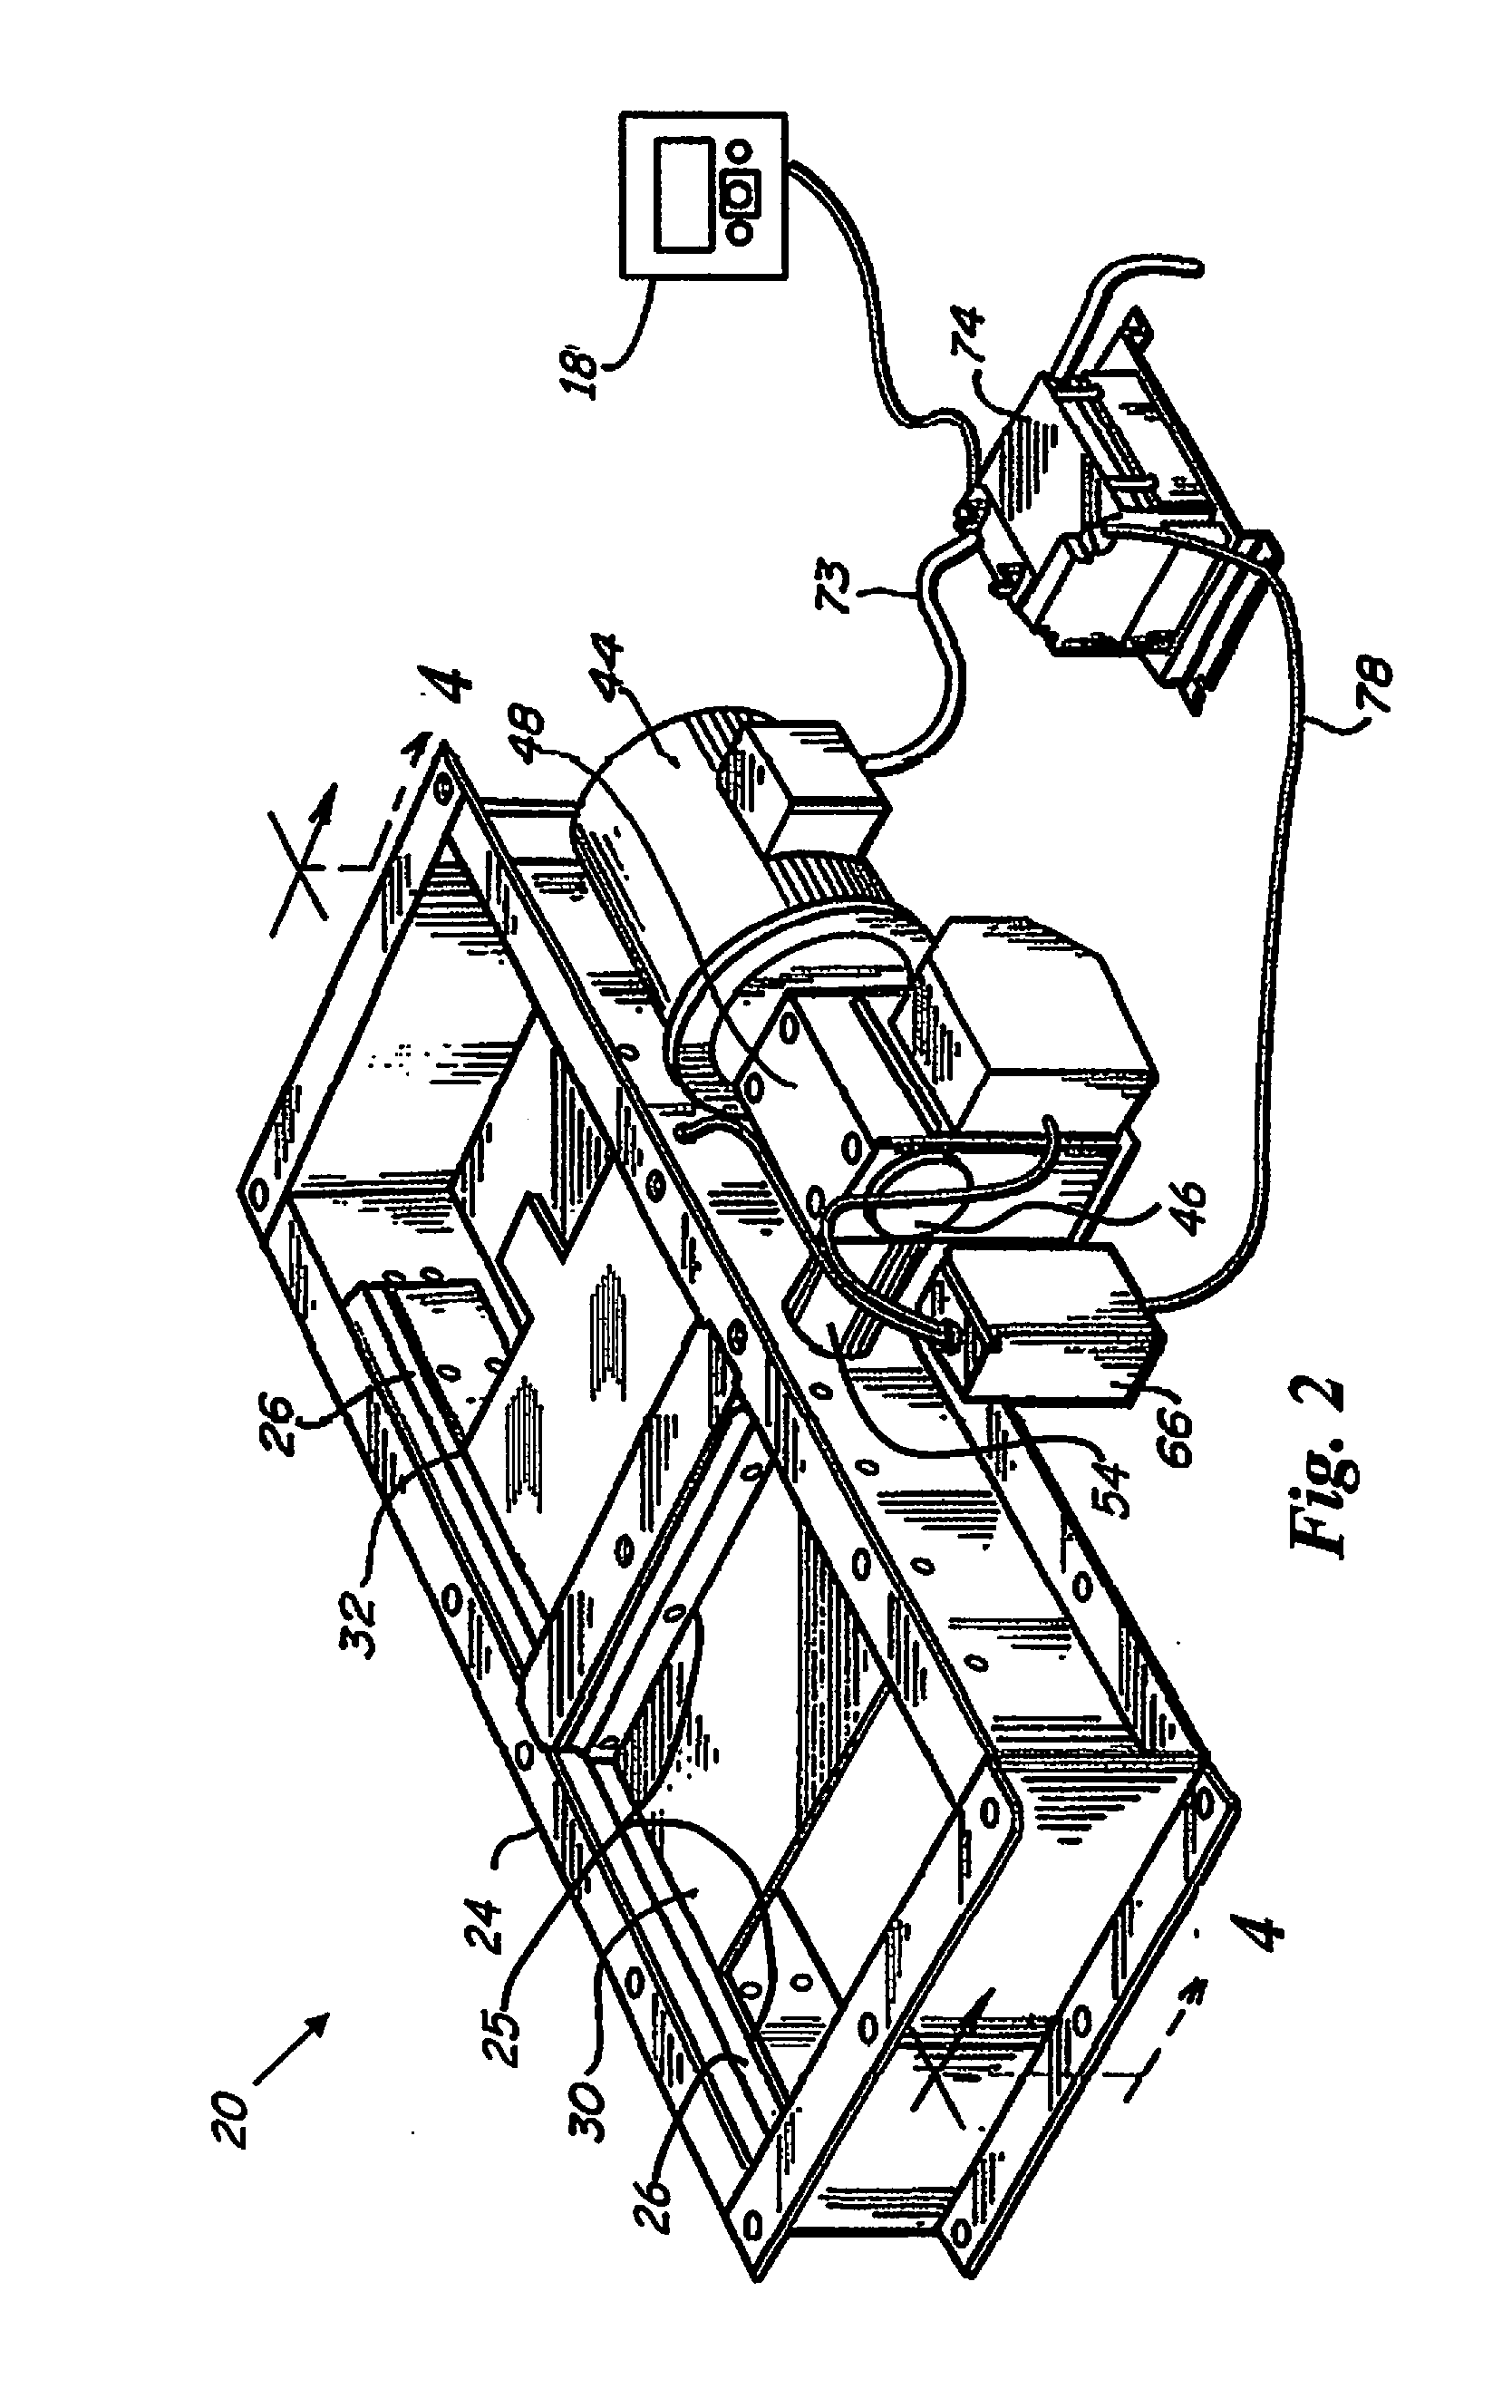 Gate with variable gate control for handling agricultural granular materials